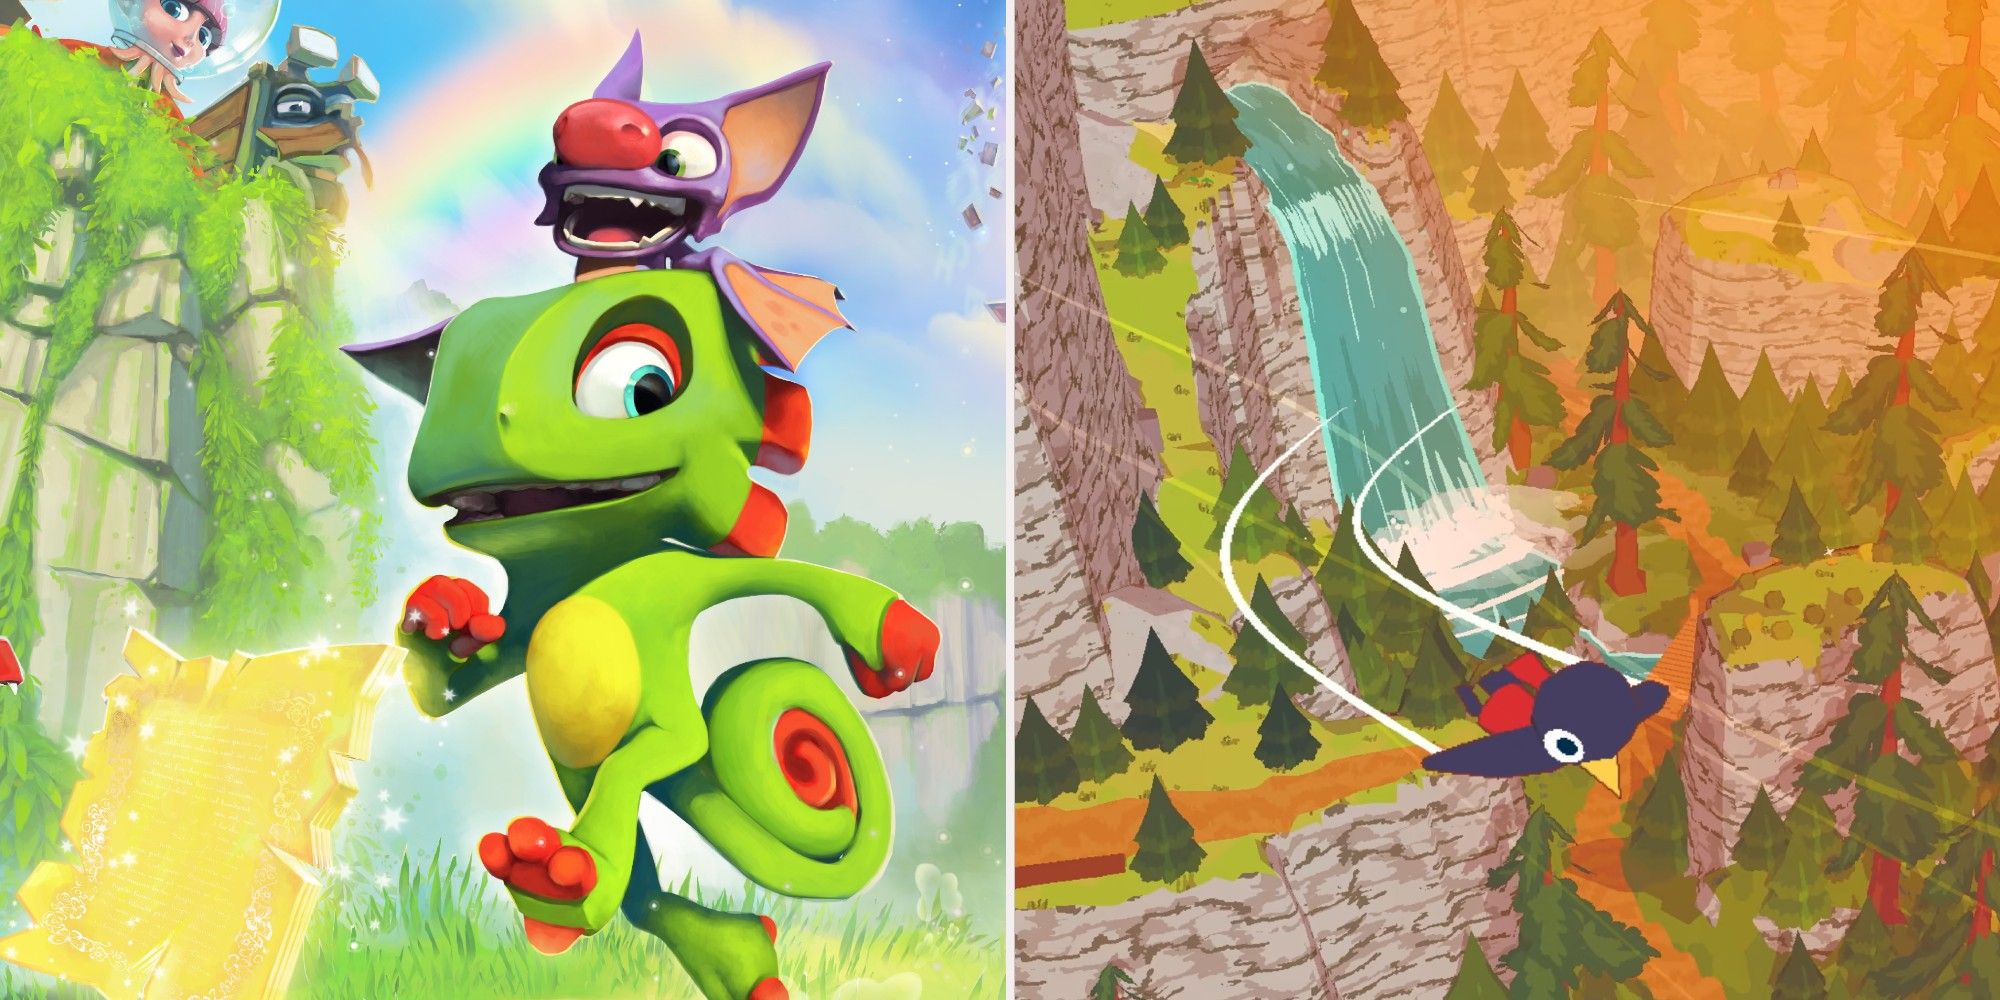 Best N64 inspired modern games feature image Yooka-Laylee and A Short Hike